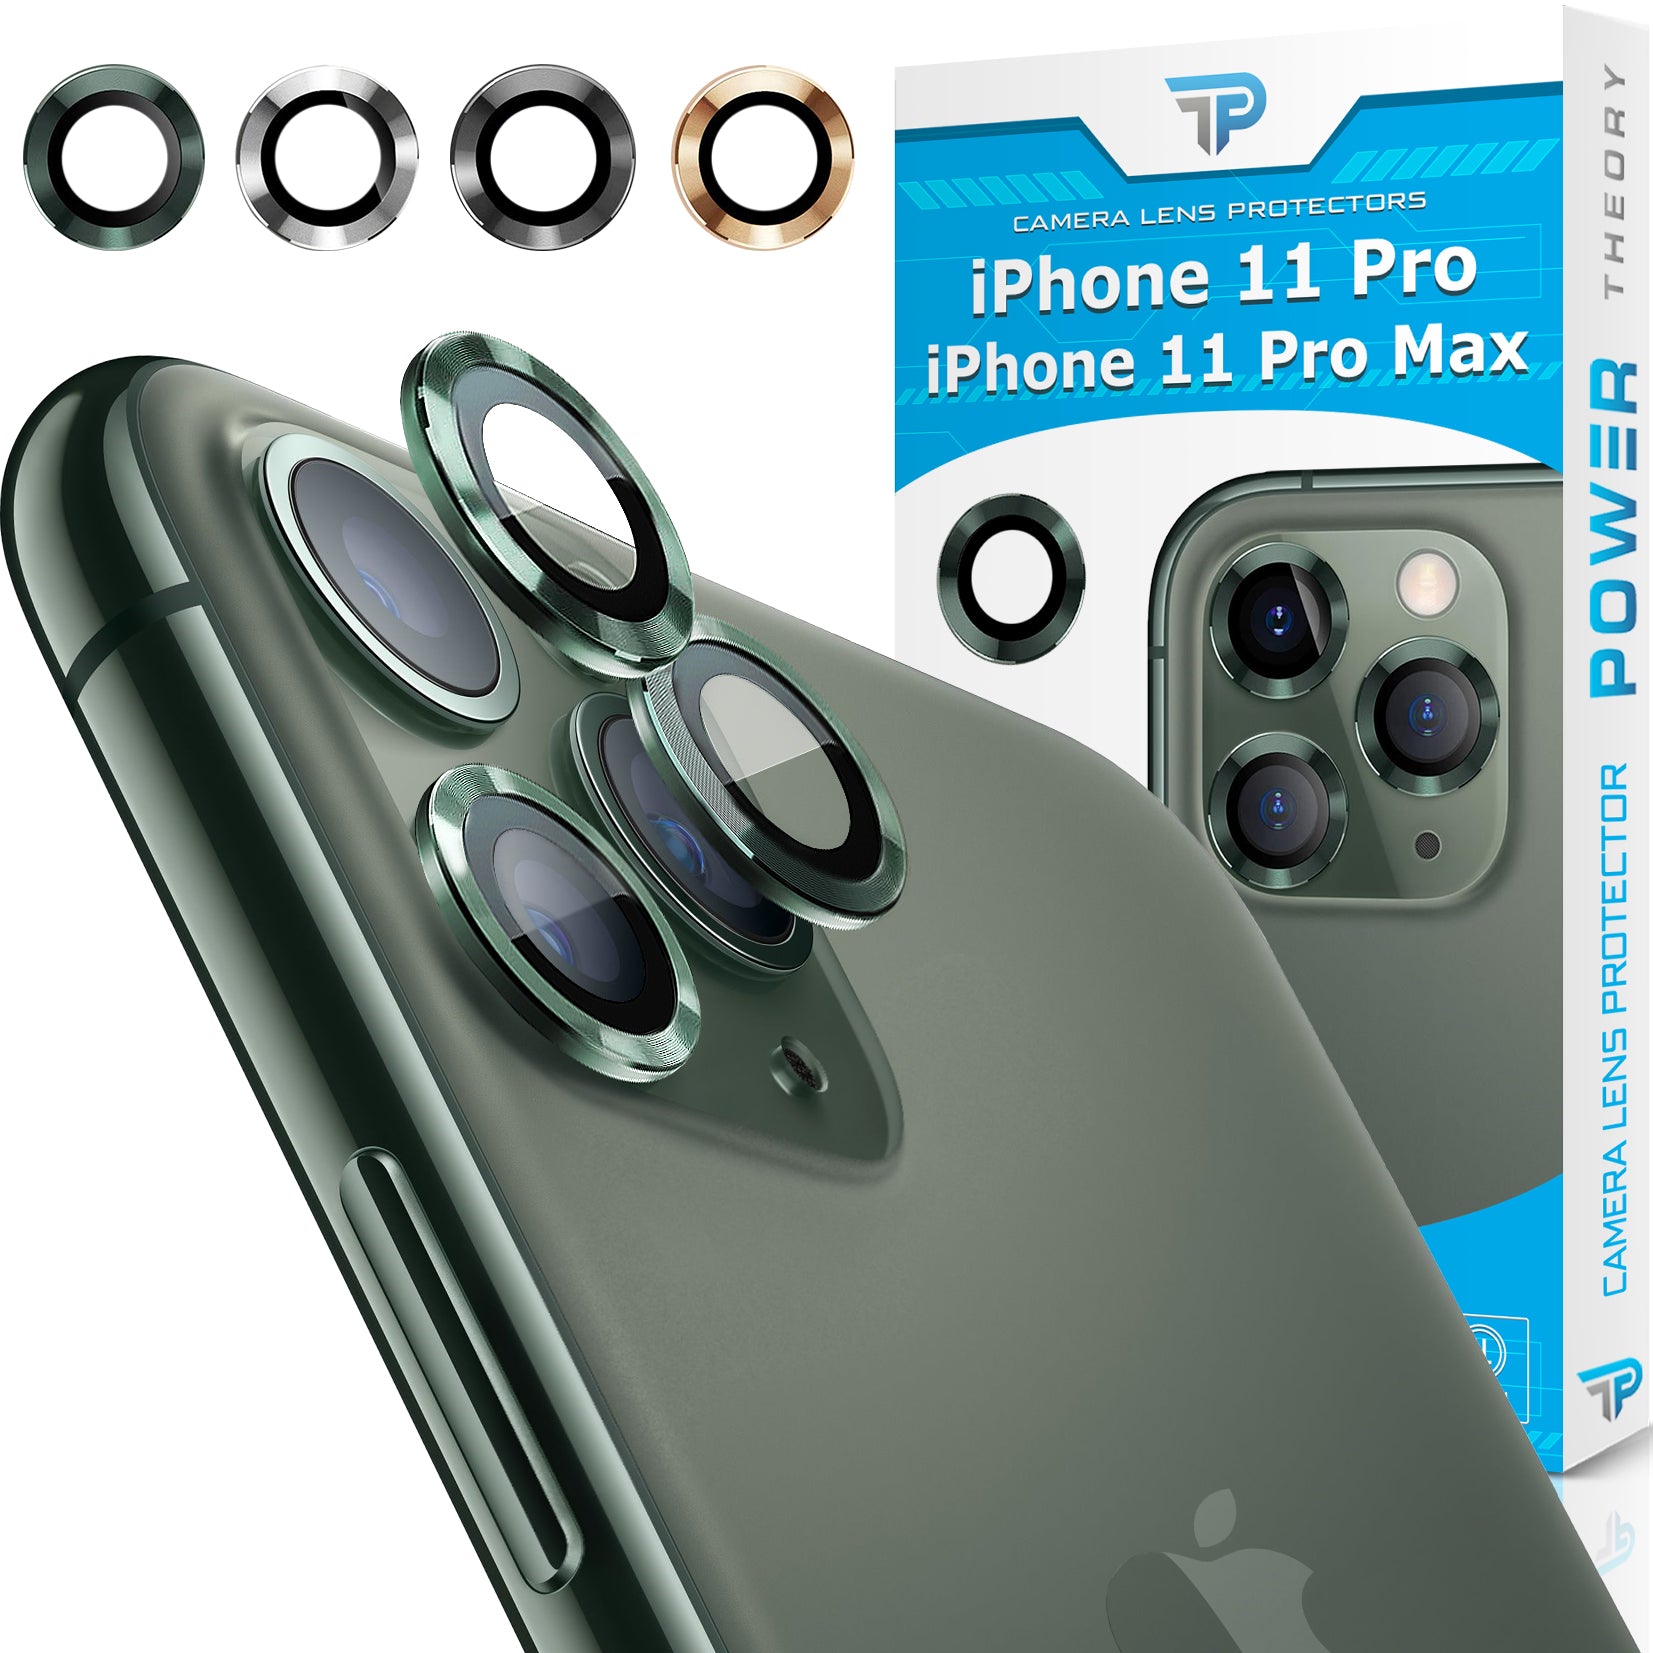 iPhone 11 Pro / 11 Pro Max Tempered Glass Camera Lens Protector [3-Pack]